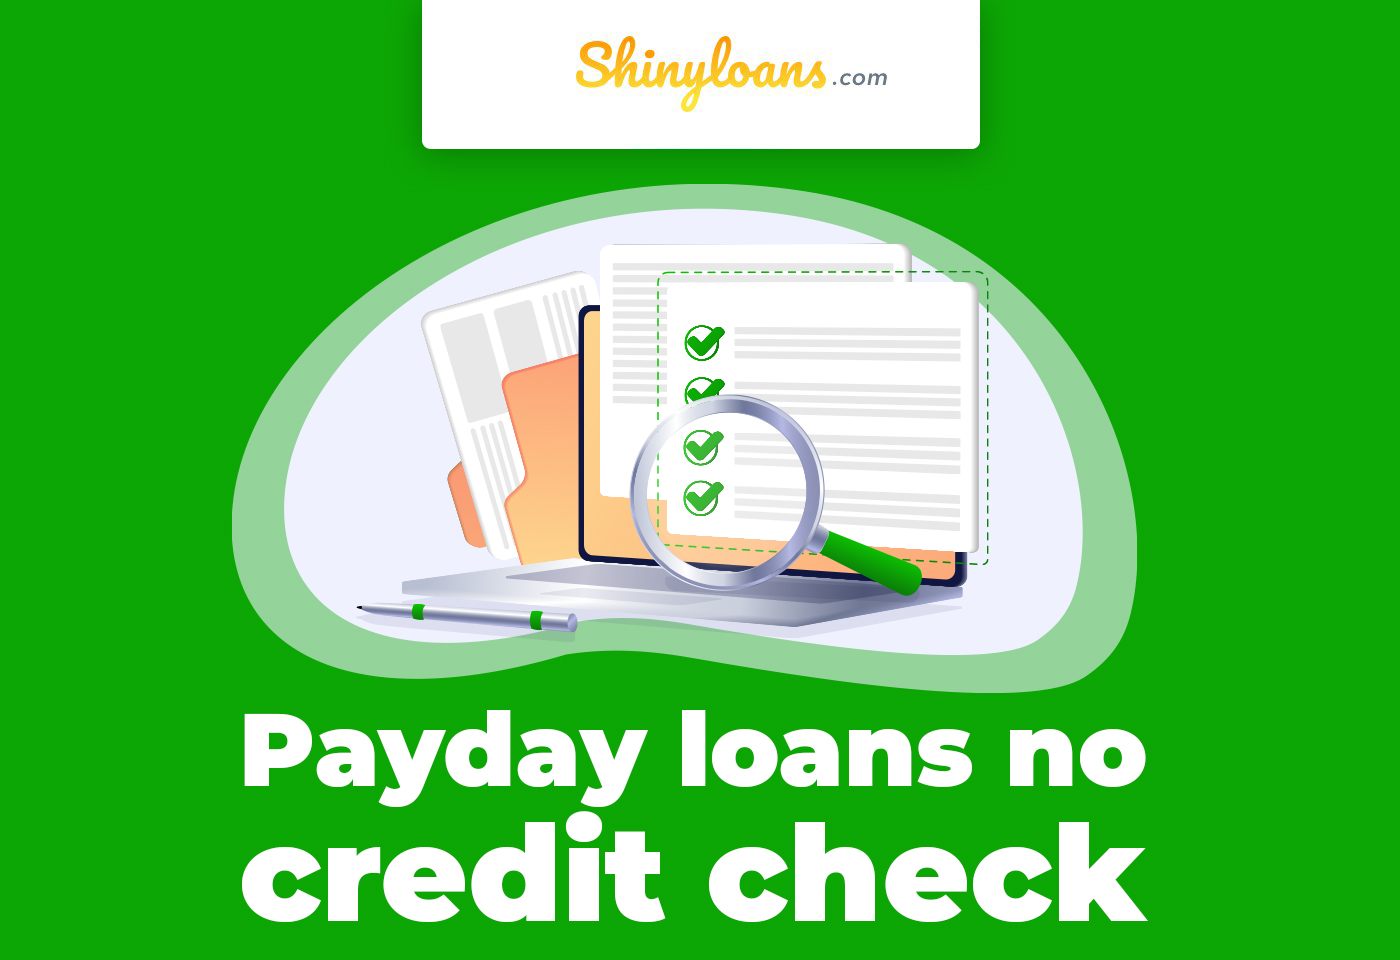 Loans No Credit Check - What Is It?